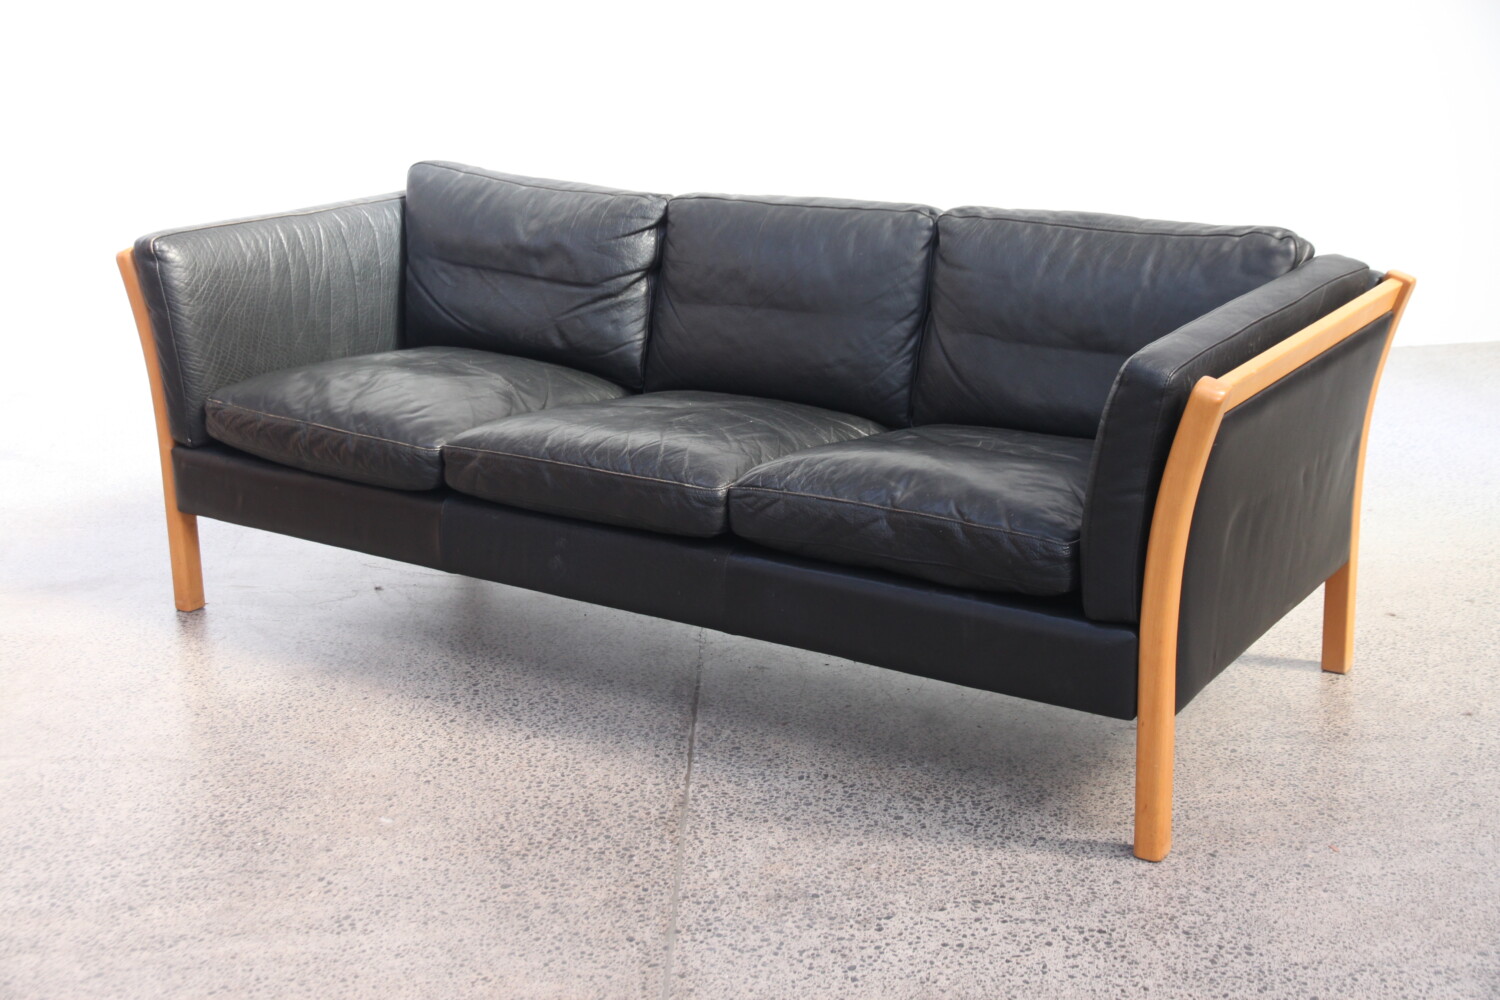 Pair of Black Leather Sofas by Stouby